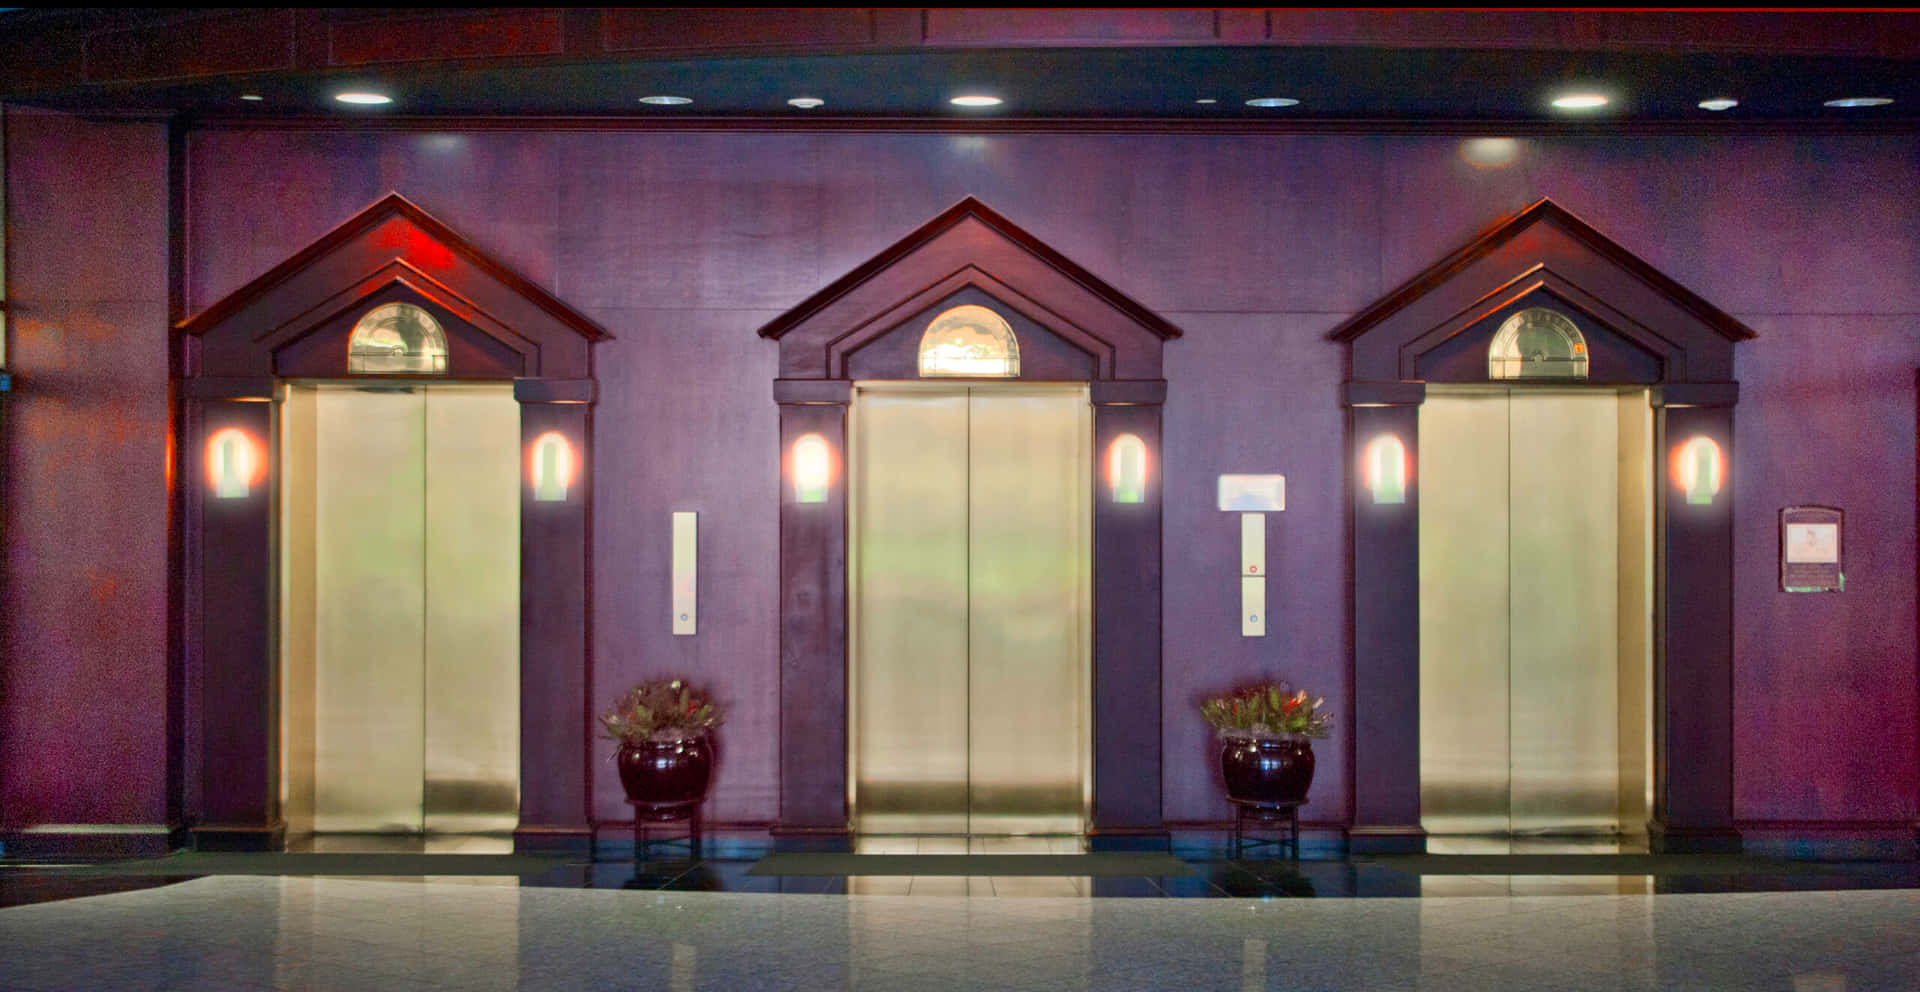 A Lobby With Several Elevators